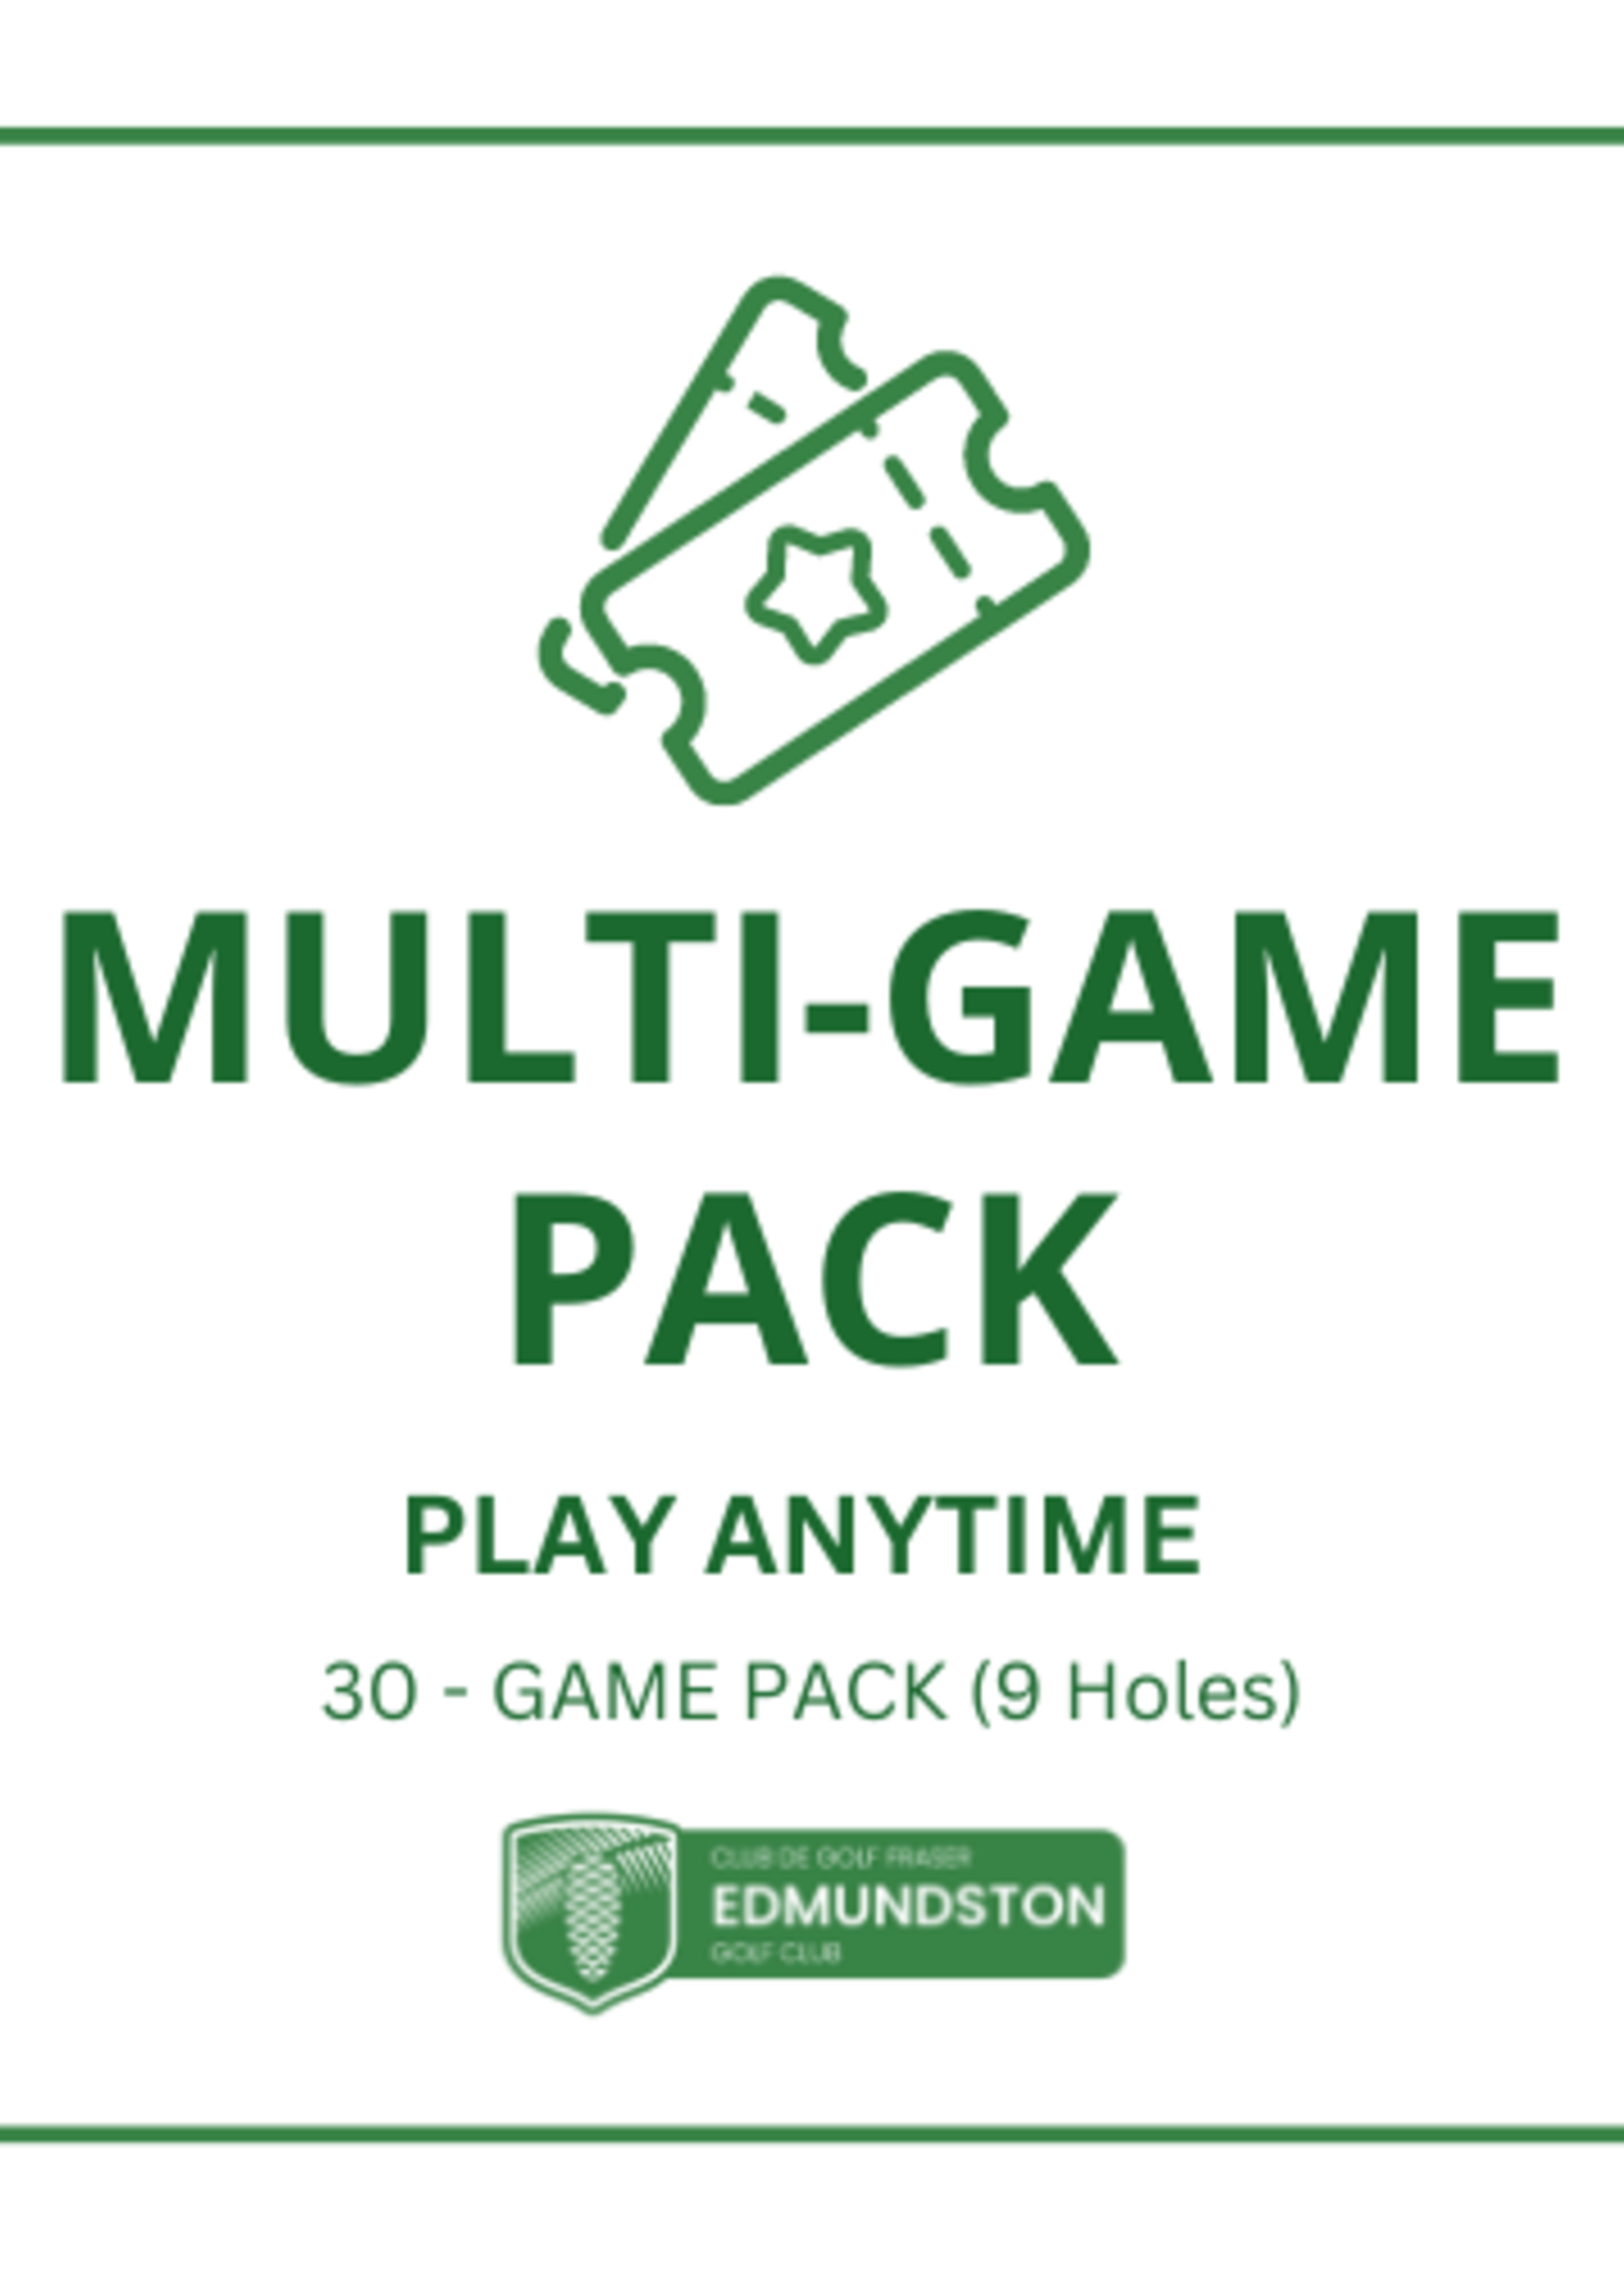 9 holes - 30-GAME PACK PLAY ANYTIME (9 HOLES)